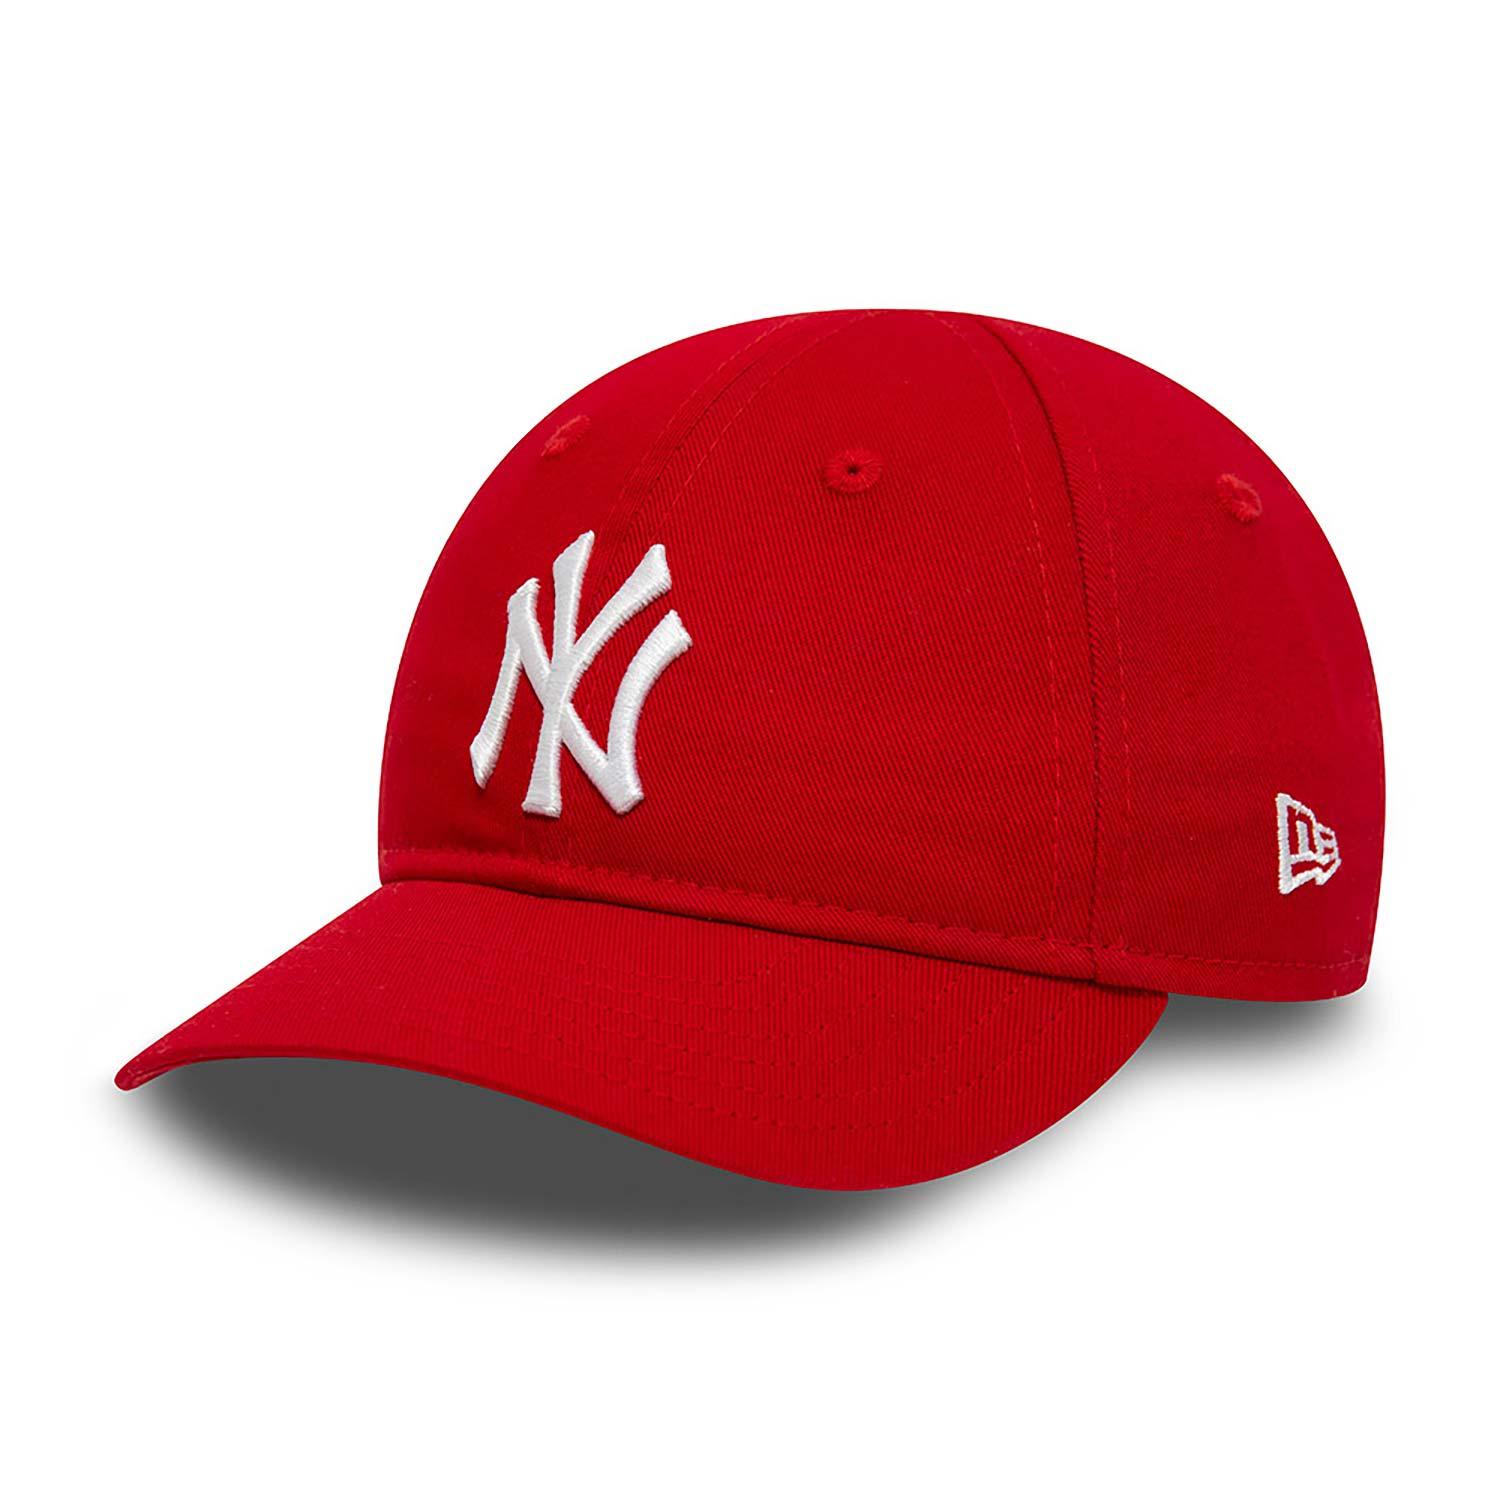 NEW ERA KIDS 9FORTY LEAGUE ESSENTIAL NEW YORK YANKEES RED CAP - FAM